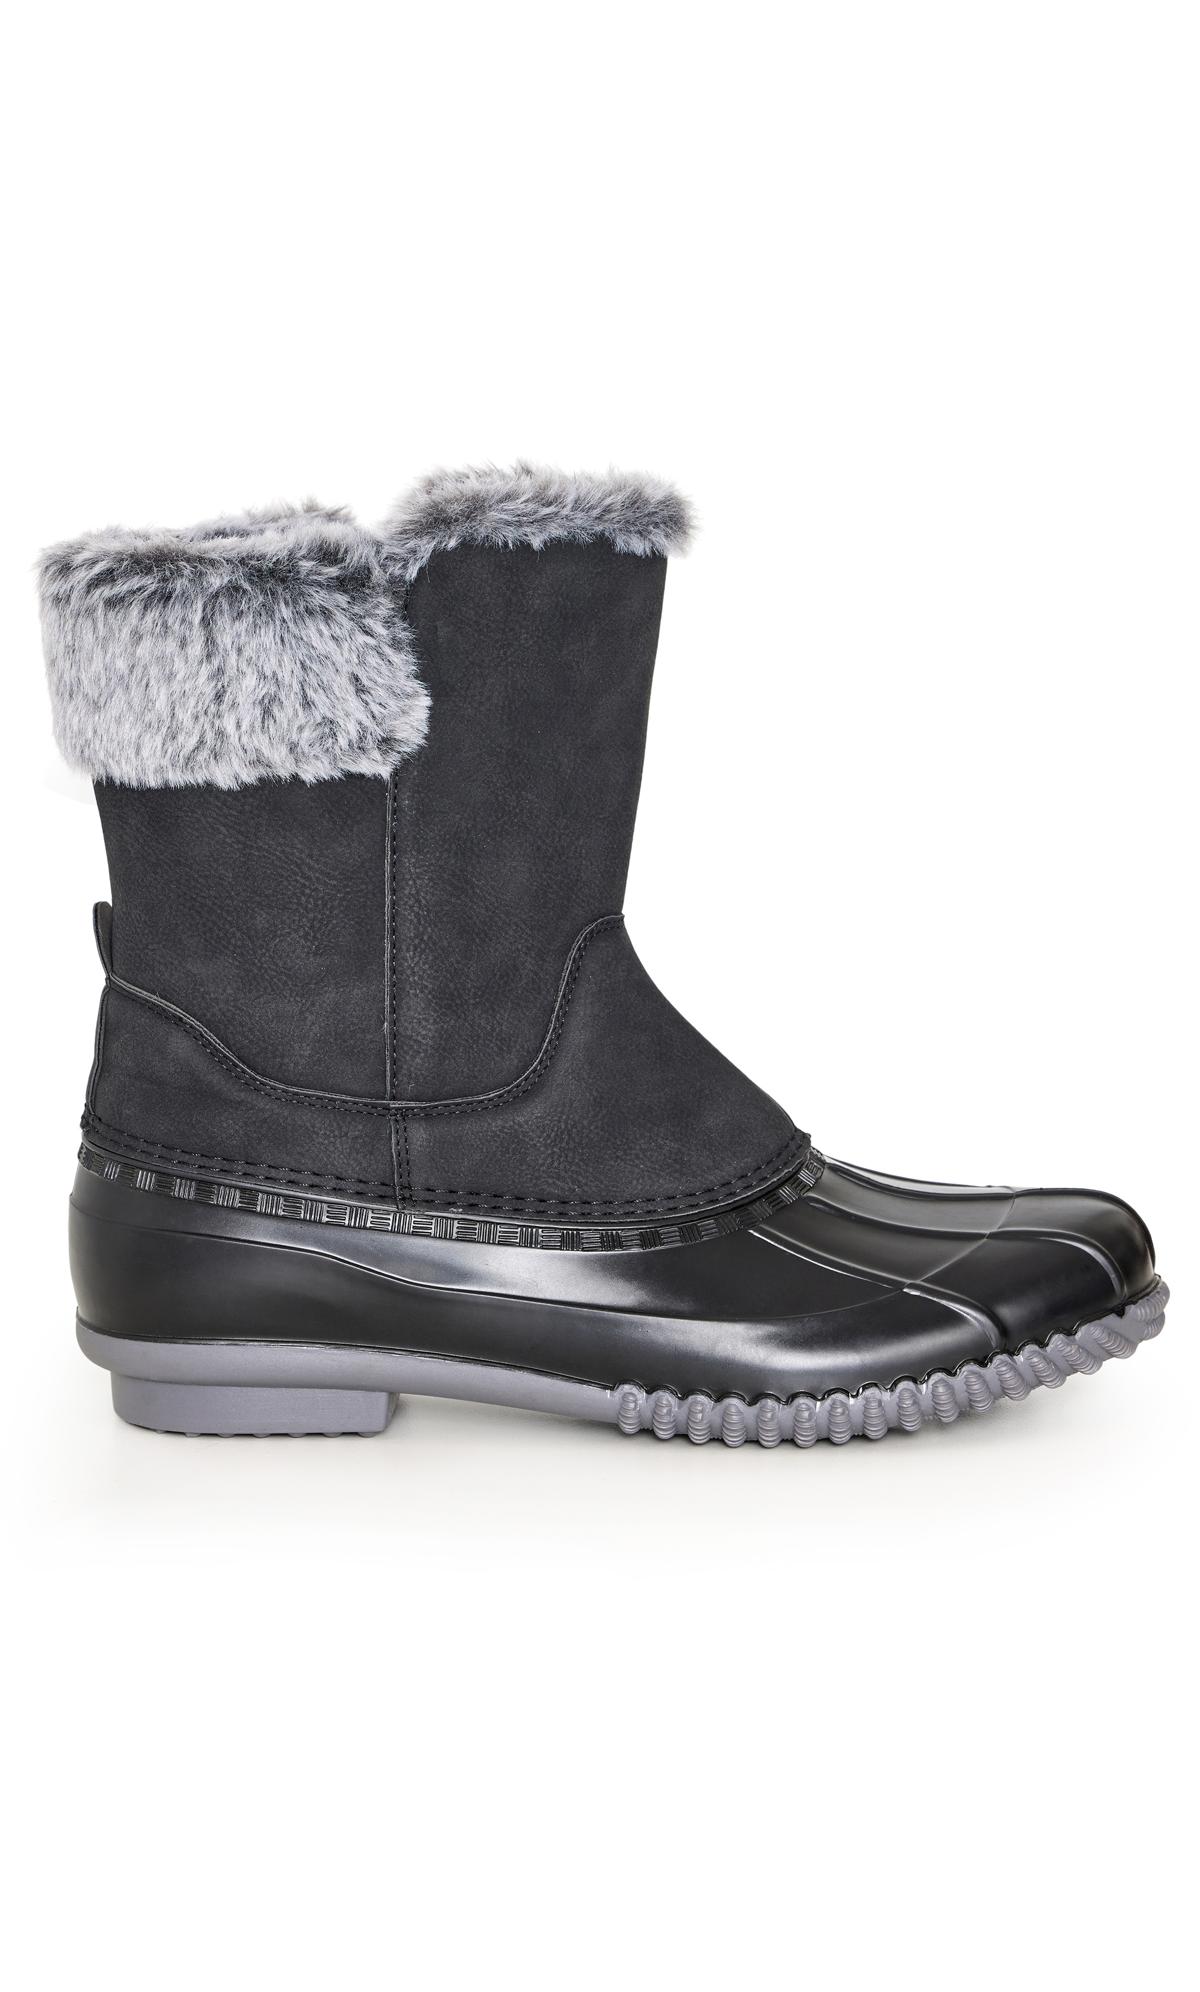 Avenue WIDE FIT Black Faux Fur Lined Embroided Snow Boots 2